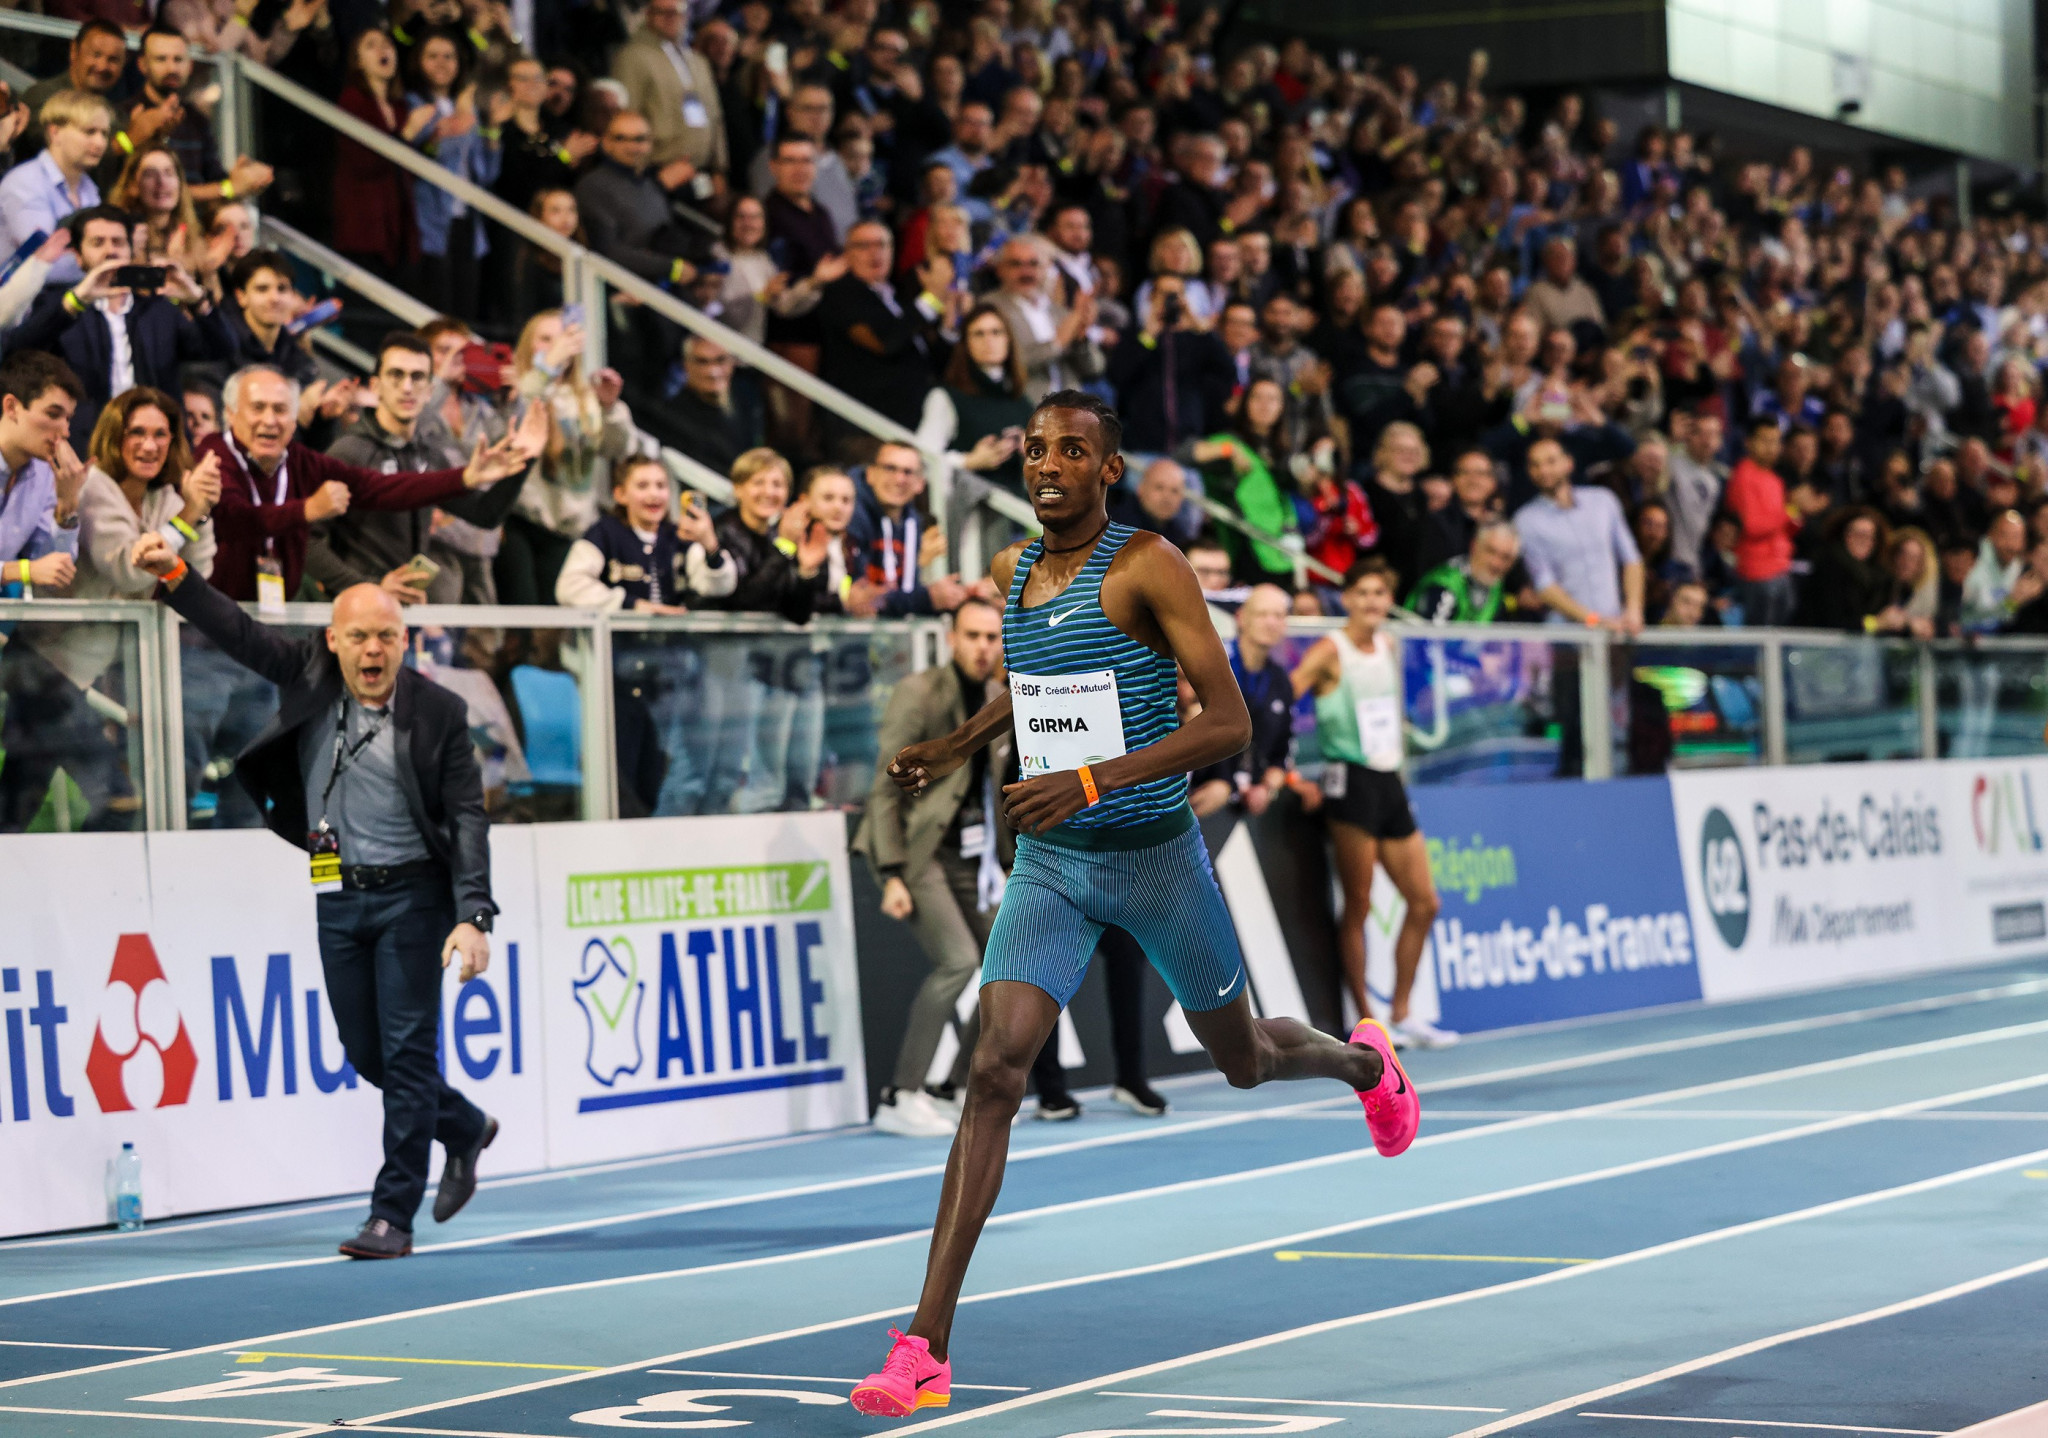  Girma beats 25-year-old men’s world indoor 3,000m record in Lievin